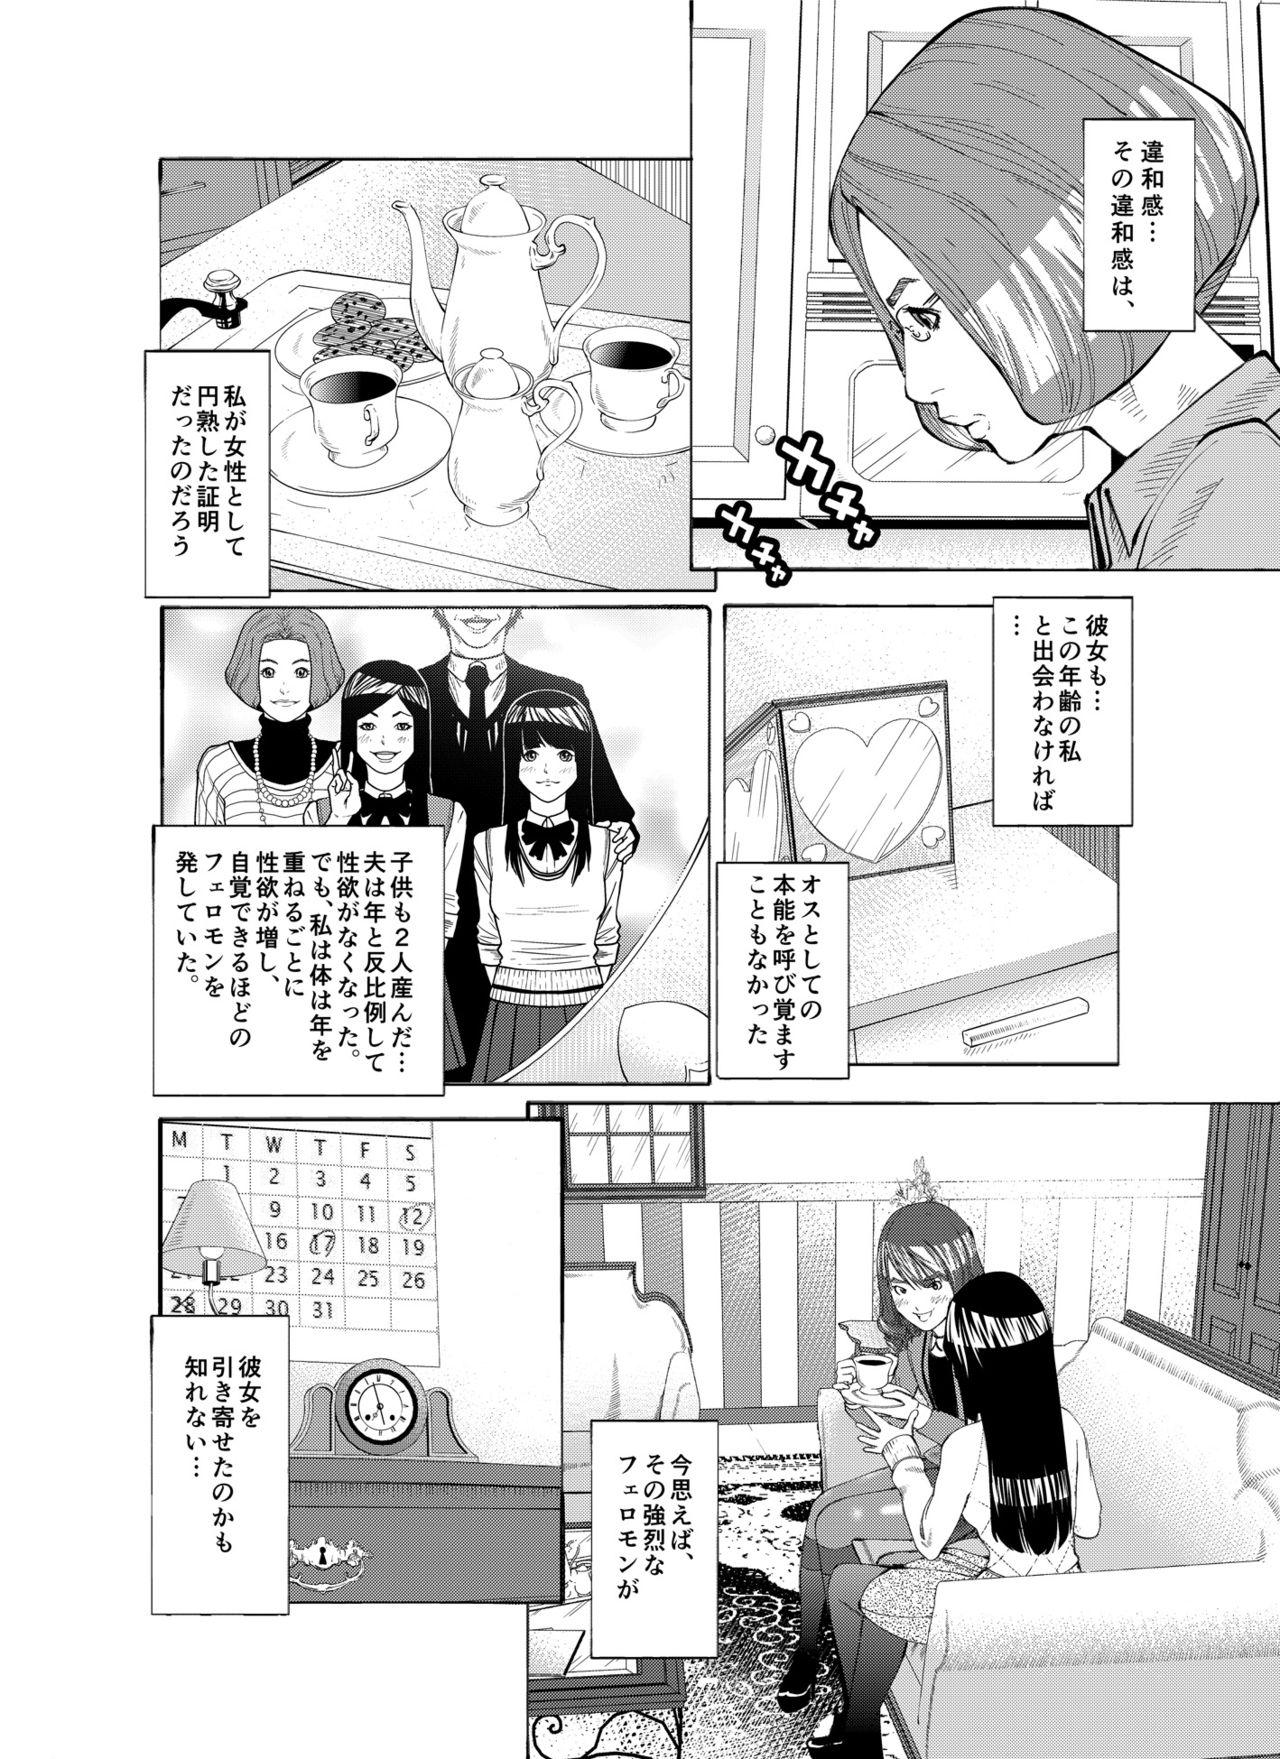 Gorda m.works vol 1 Family Roleplay - Page 4